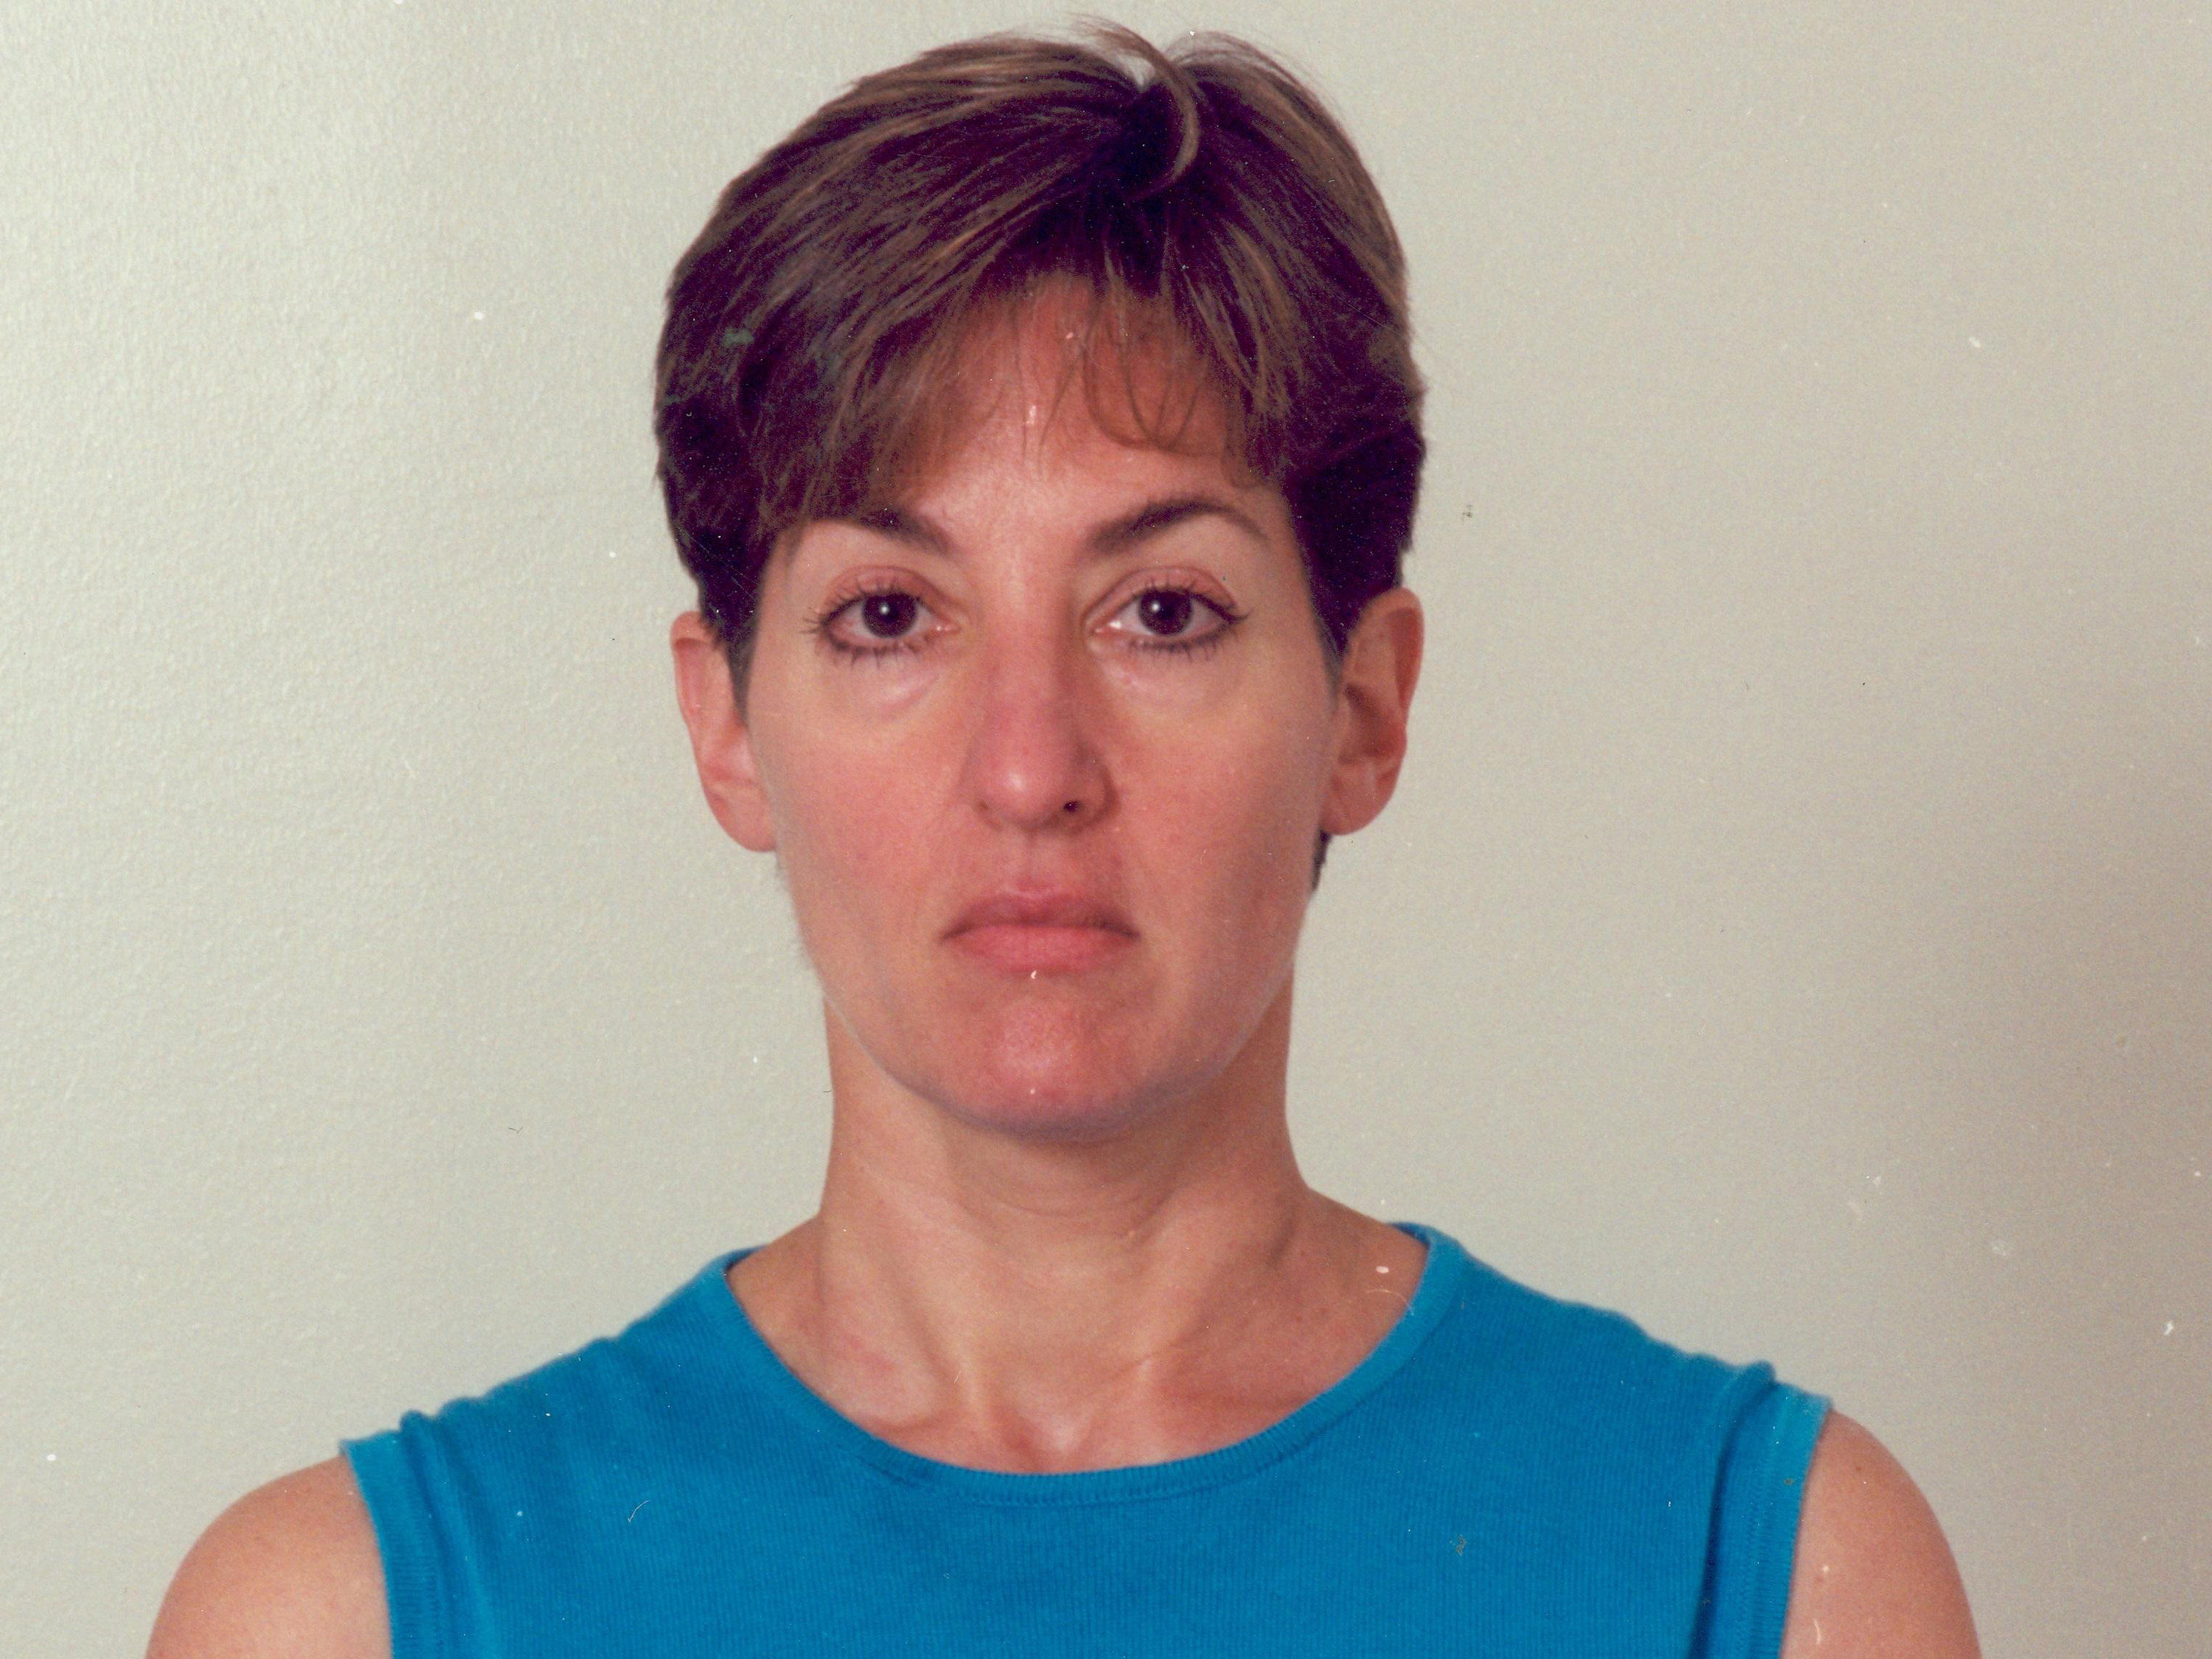 Ana Belen Montes, who pled guilty to spying for the Cubans in 2002 following an FBI investigation. Photo: TNS